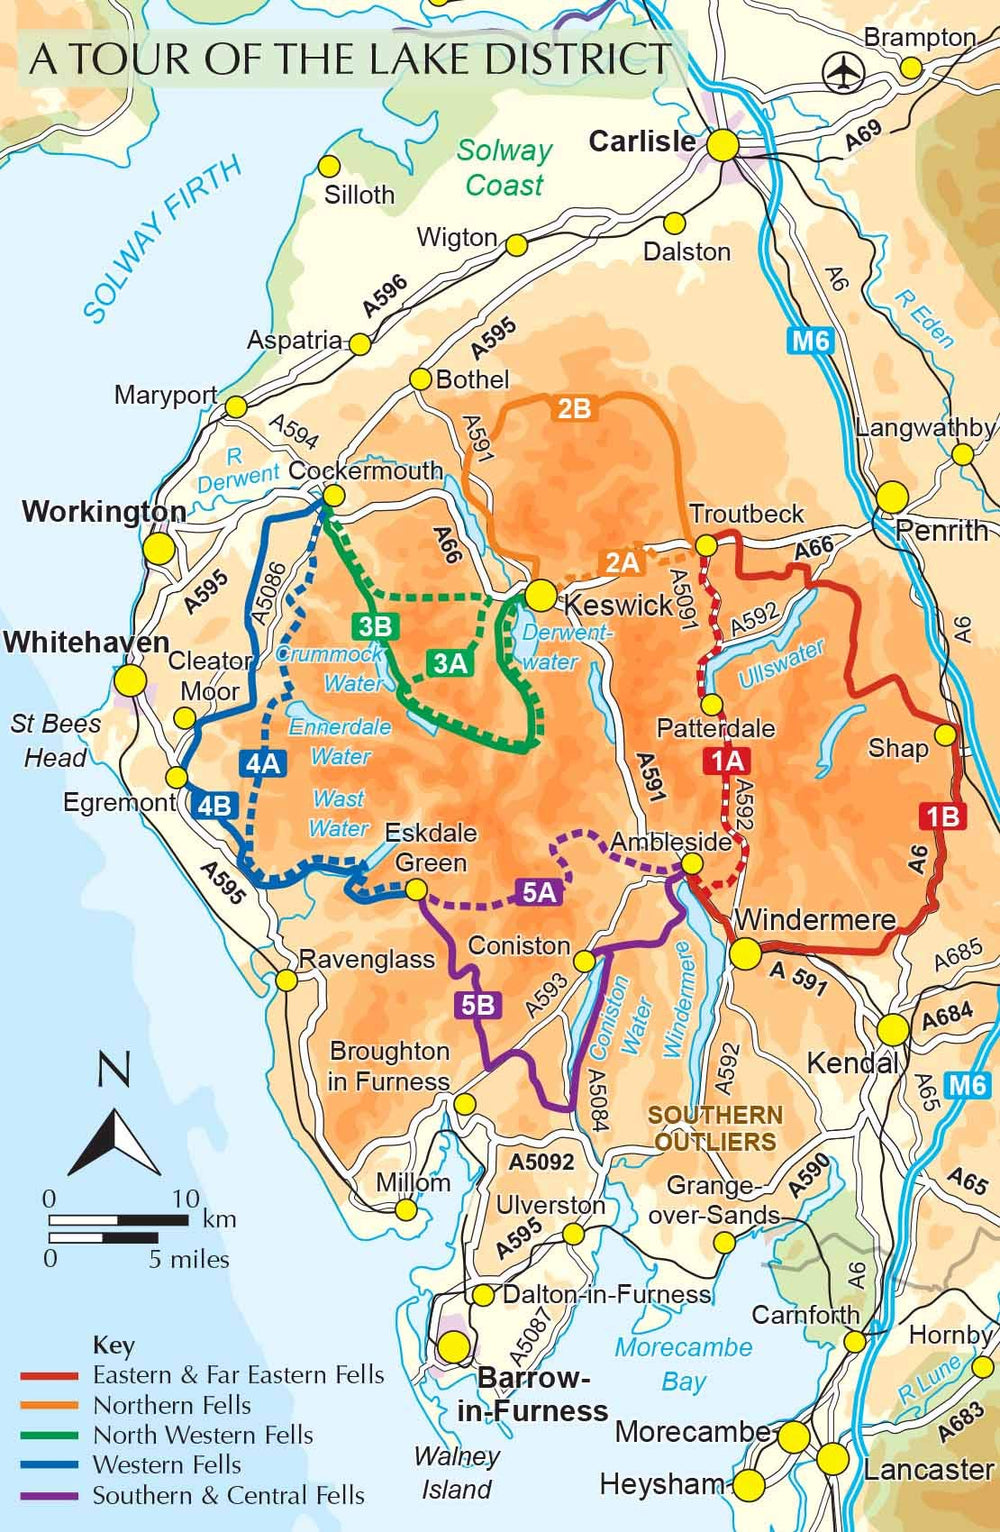 Guide vélo (en anglais) - Lake District cycle touring week-long tours & 15 day rides | Cicerone guide vélo Cicerone 